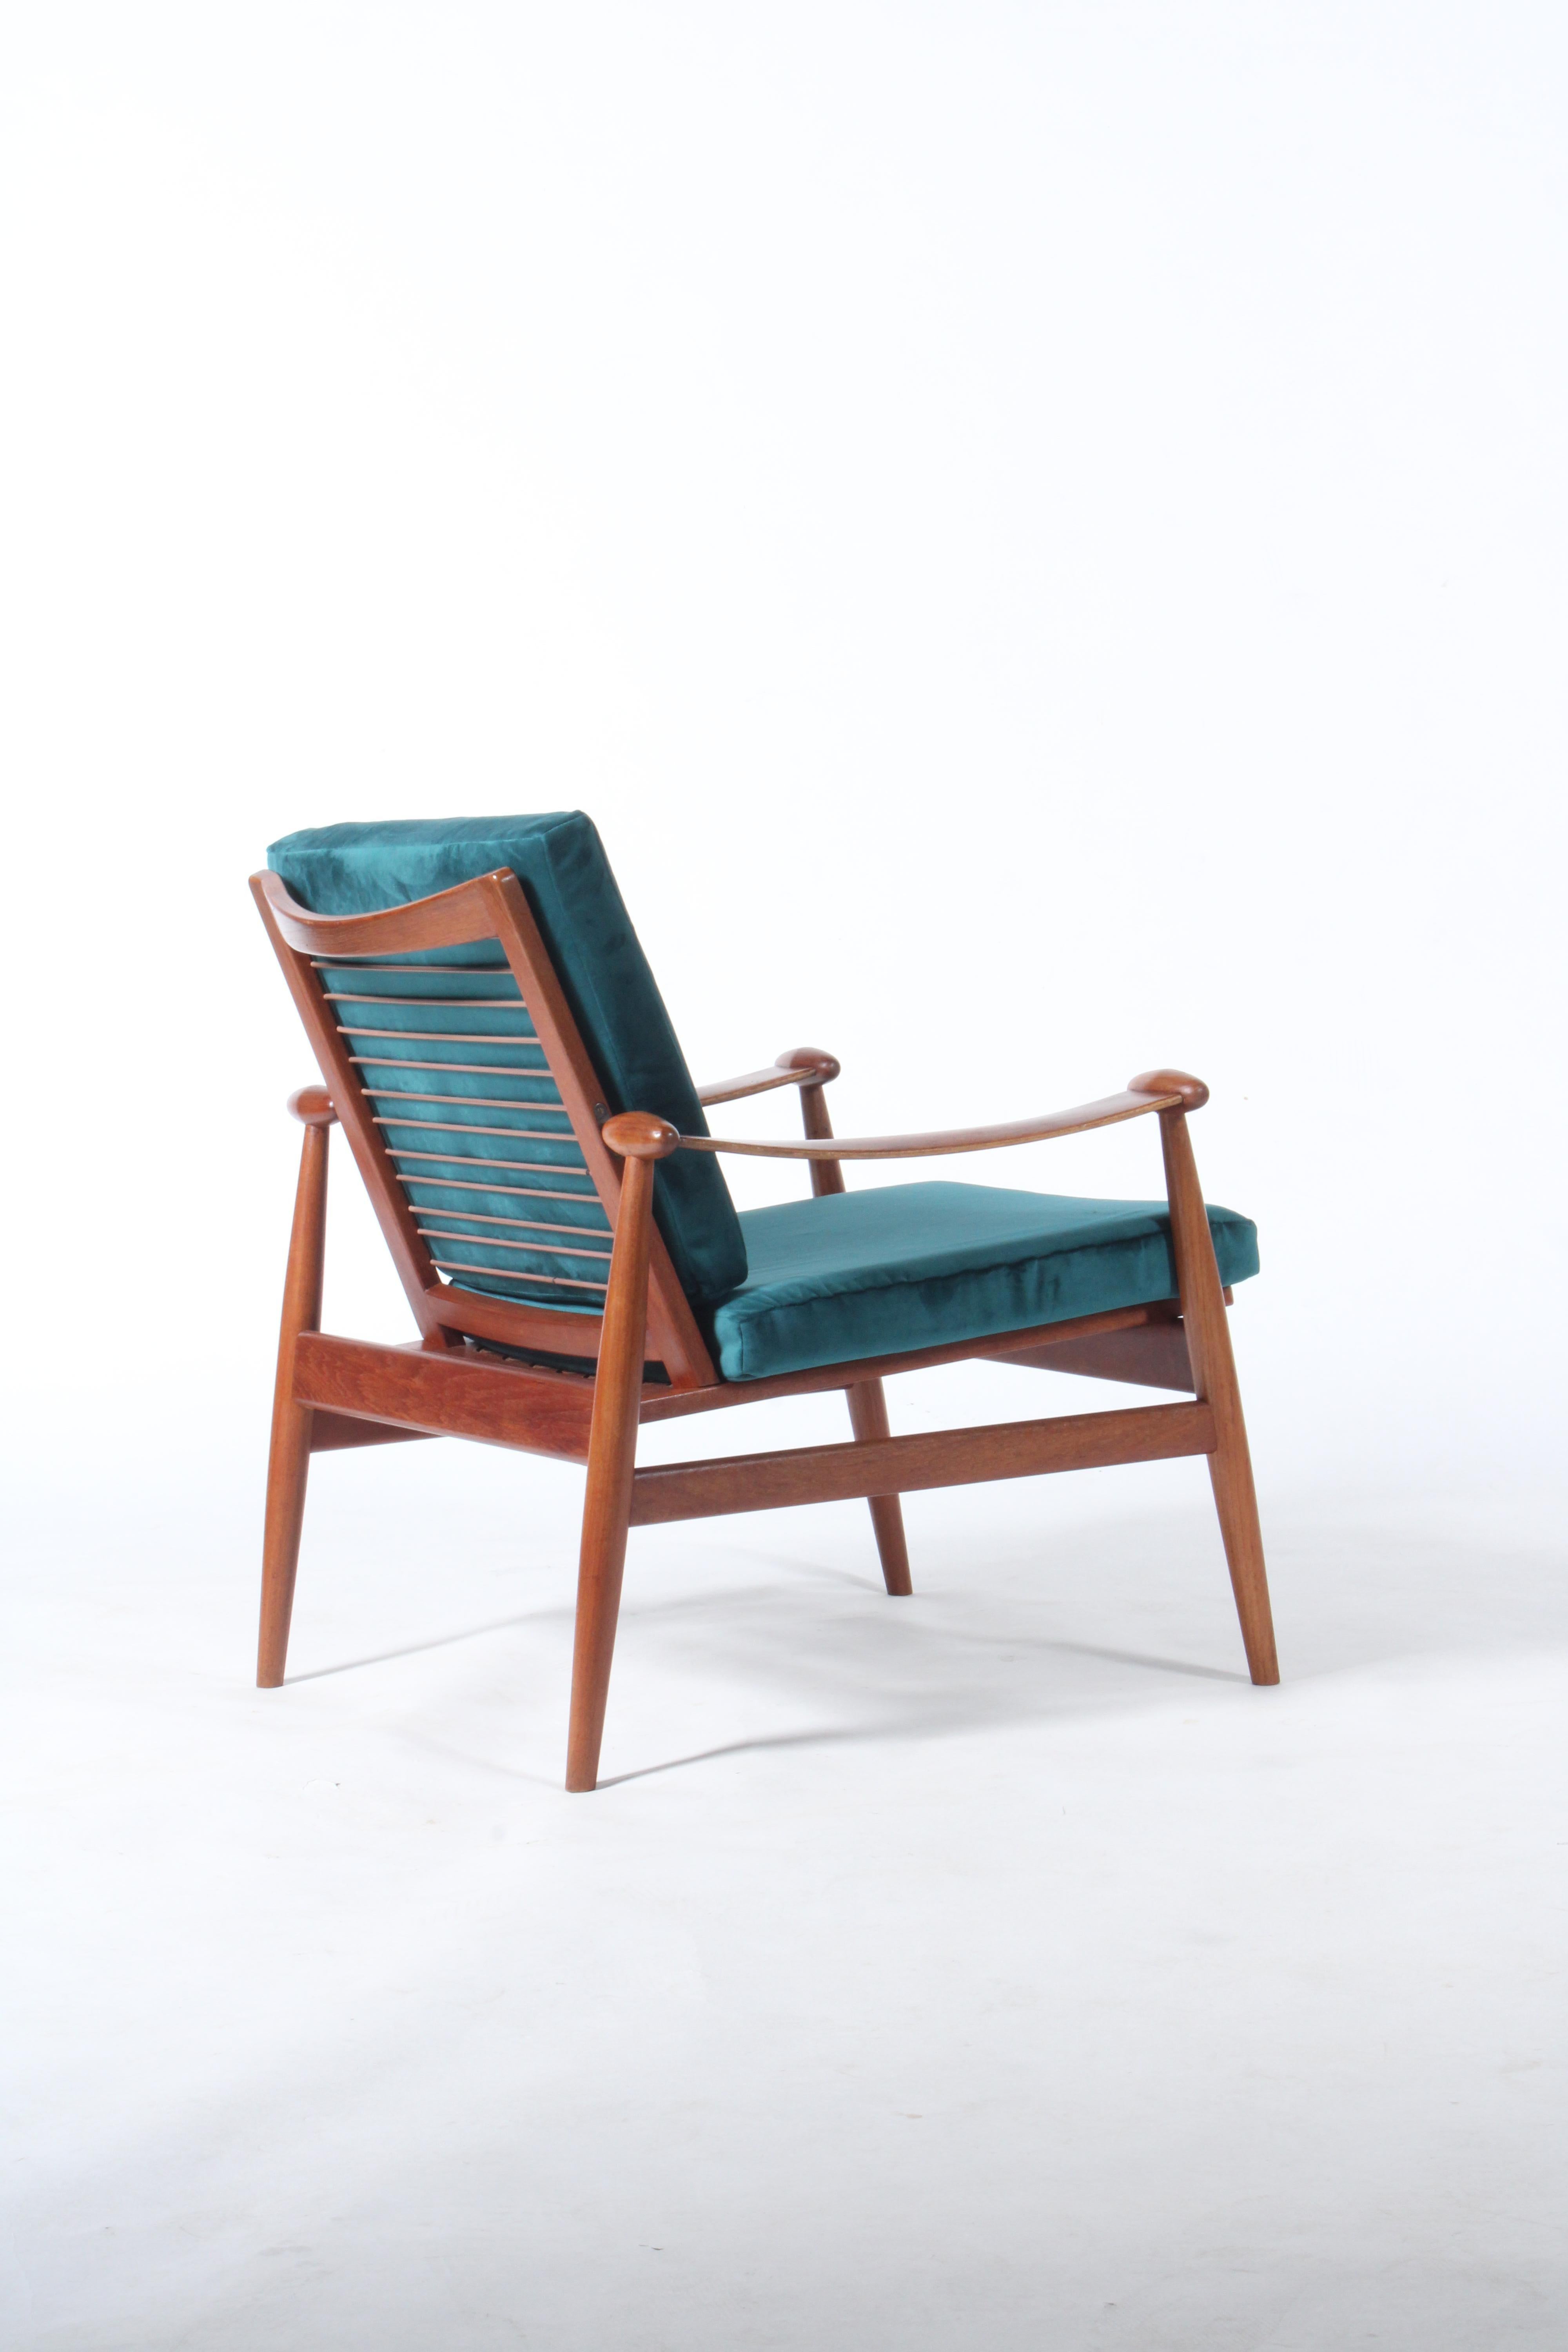 Exquisite Mid Century Danish Spade Chair By Finn Juhl For France & Son In Teak For Sale 1